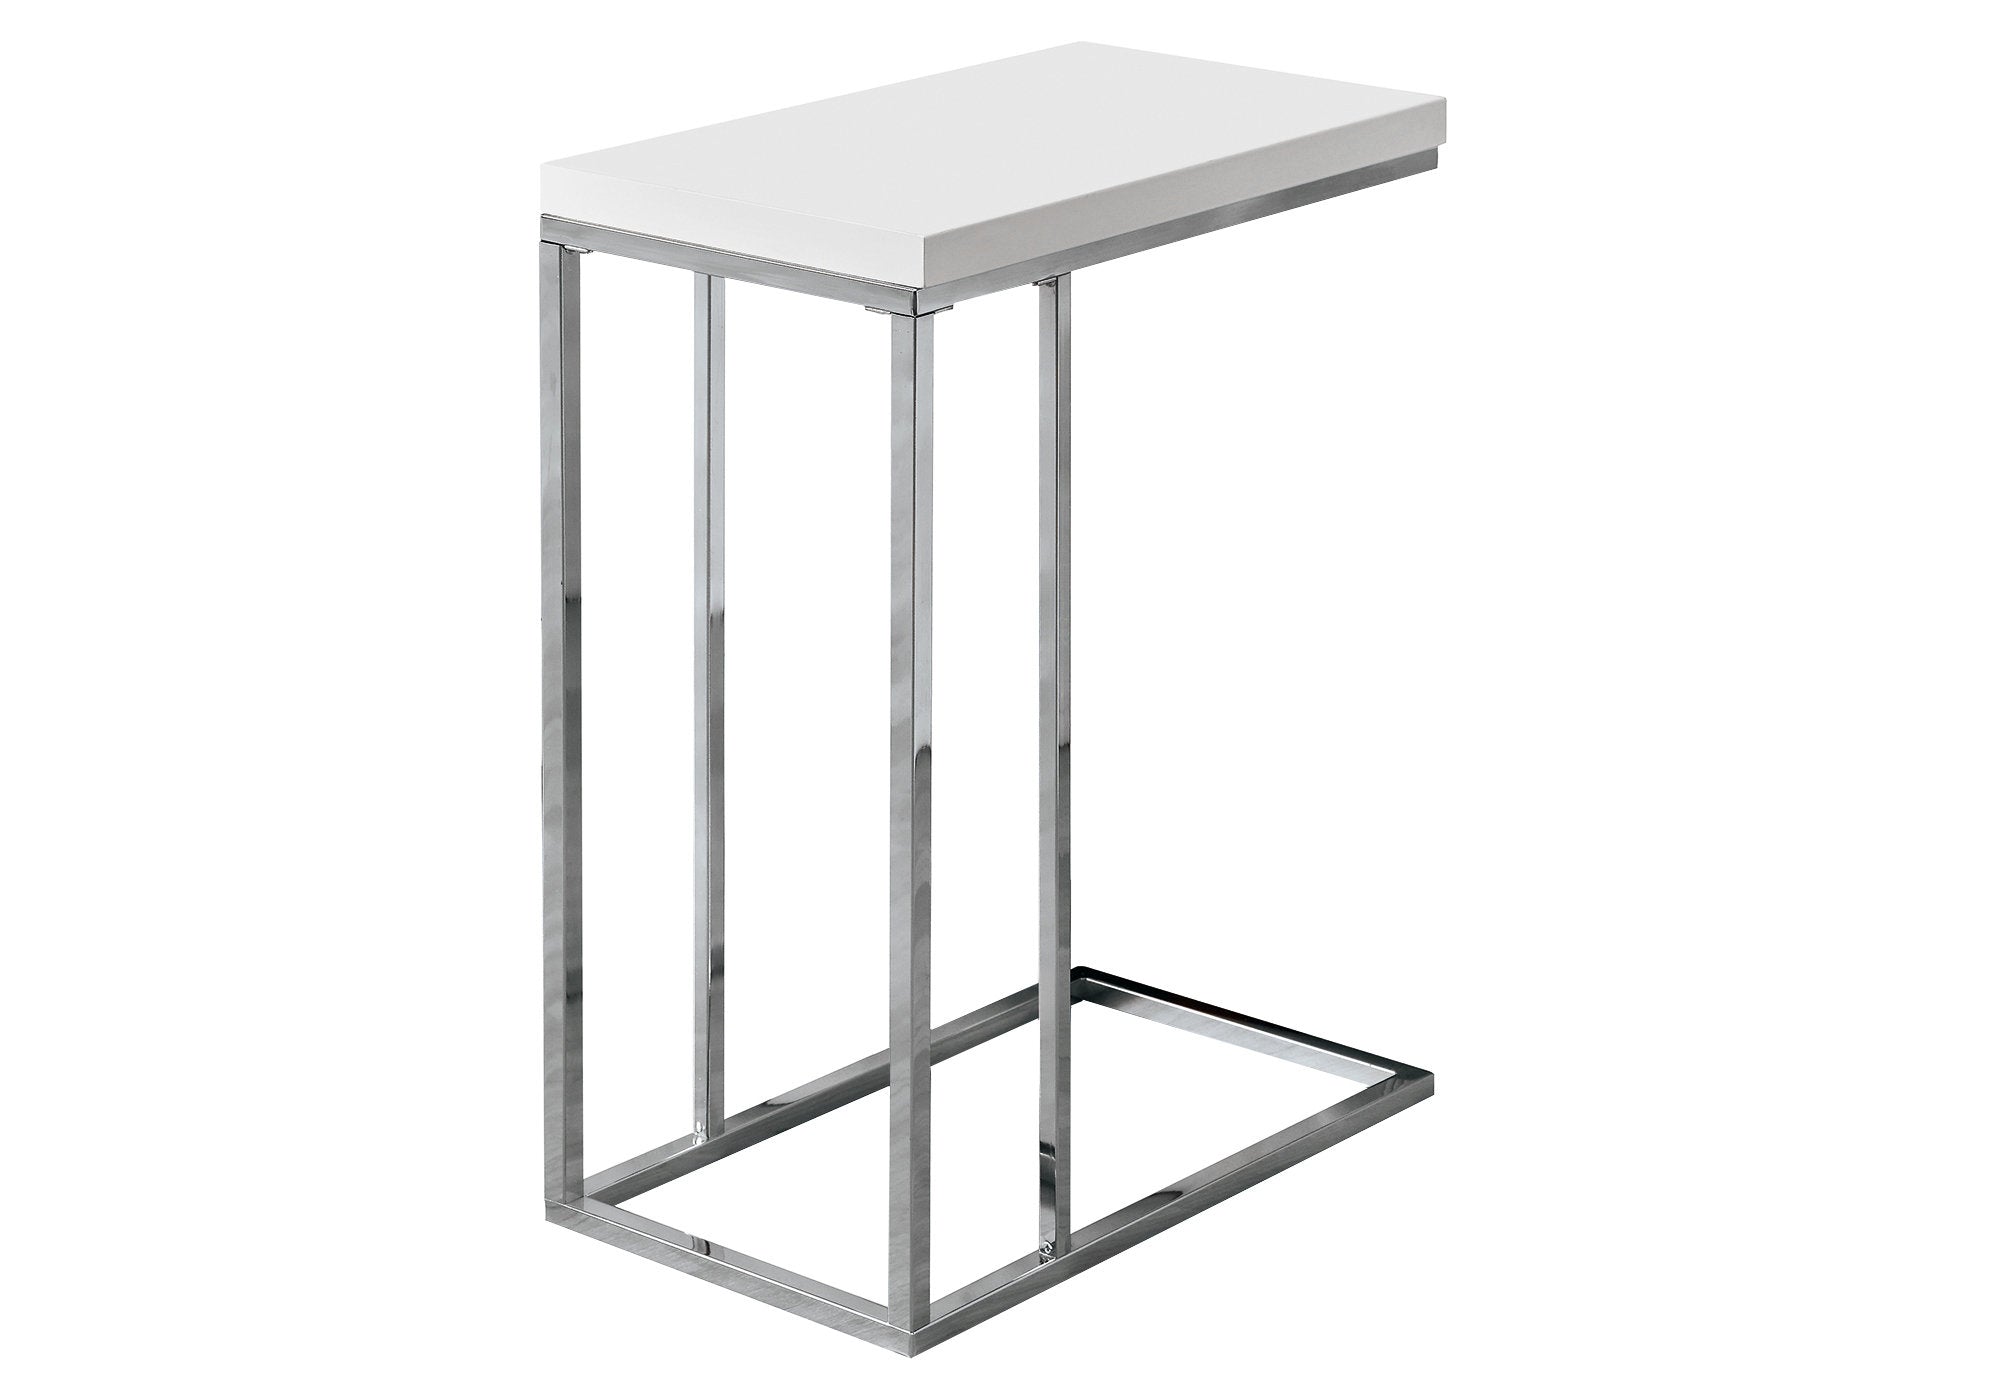 MN-763008    Accent Table, C-Shaped, End, Side, Snack, Living Room, Bedroom, Metal Legs, Laminate, Glossy White, Chrome, Contemporary, Modern